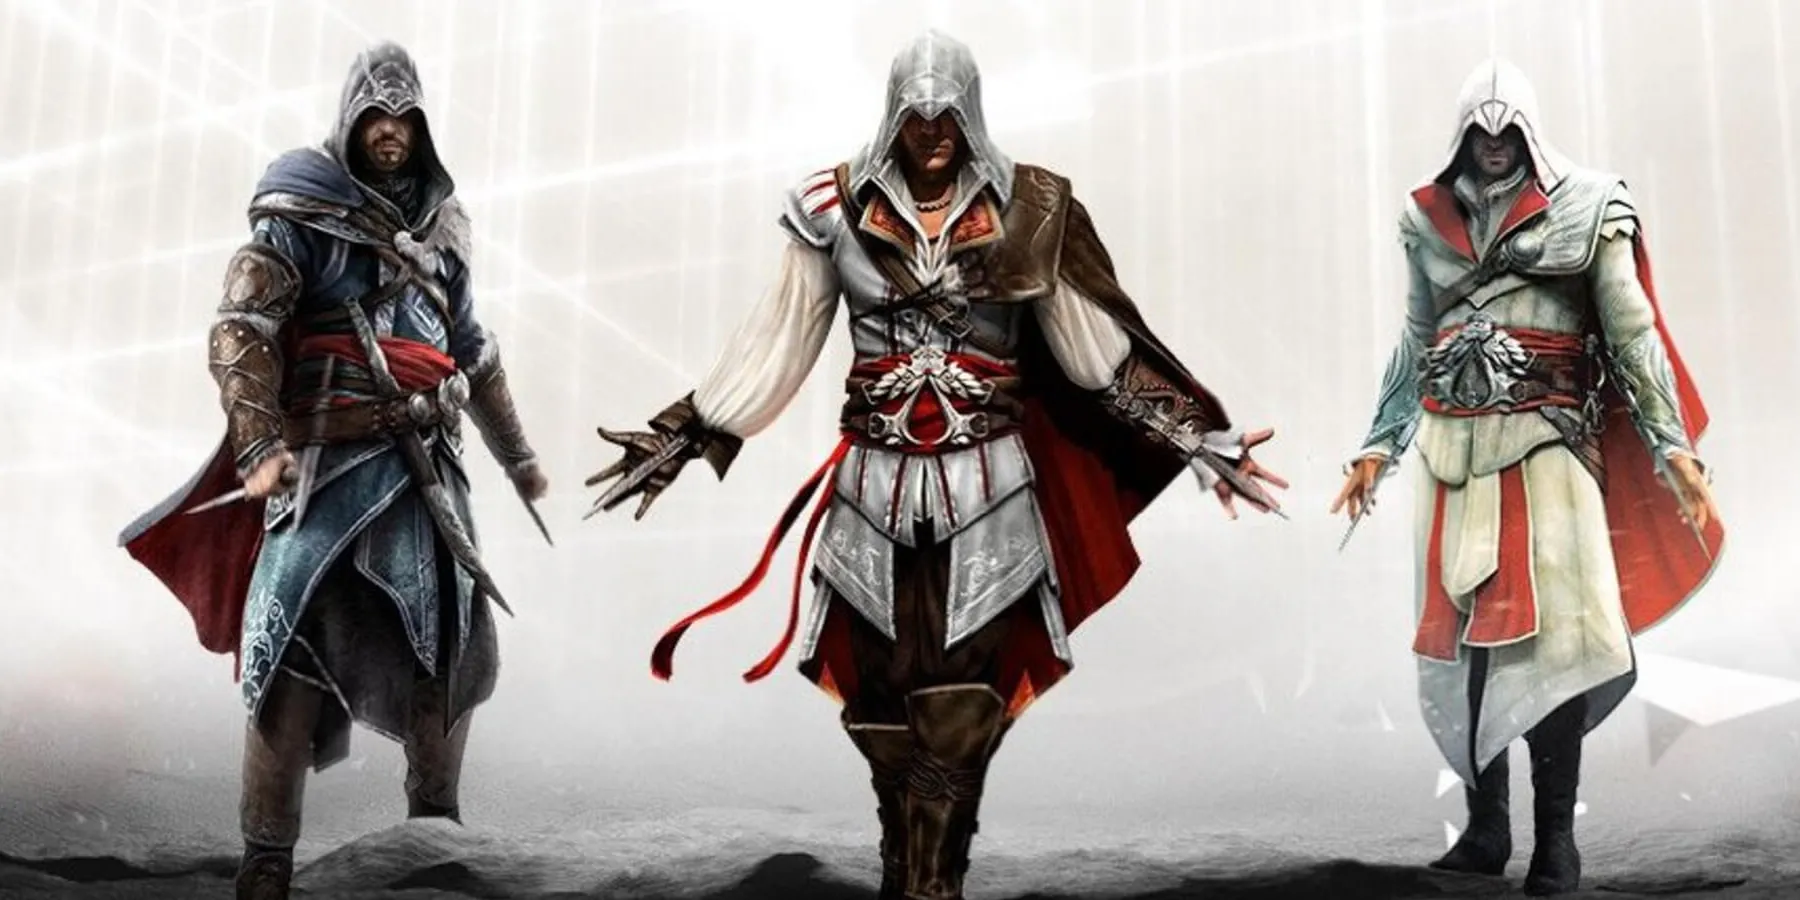 Assassin’s Creed Games